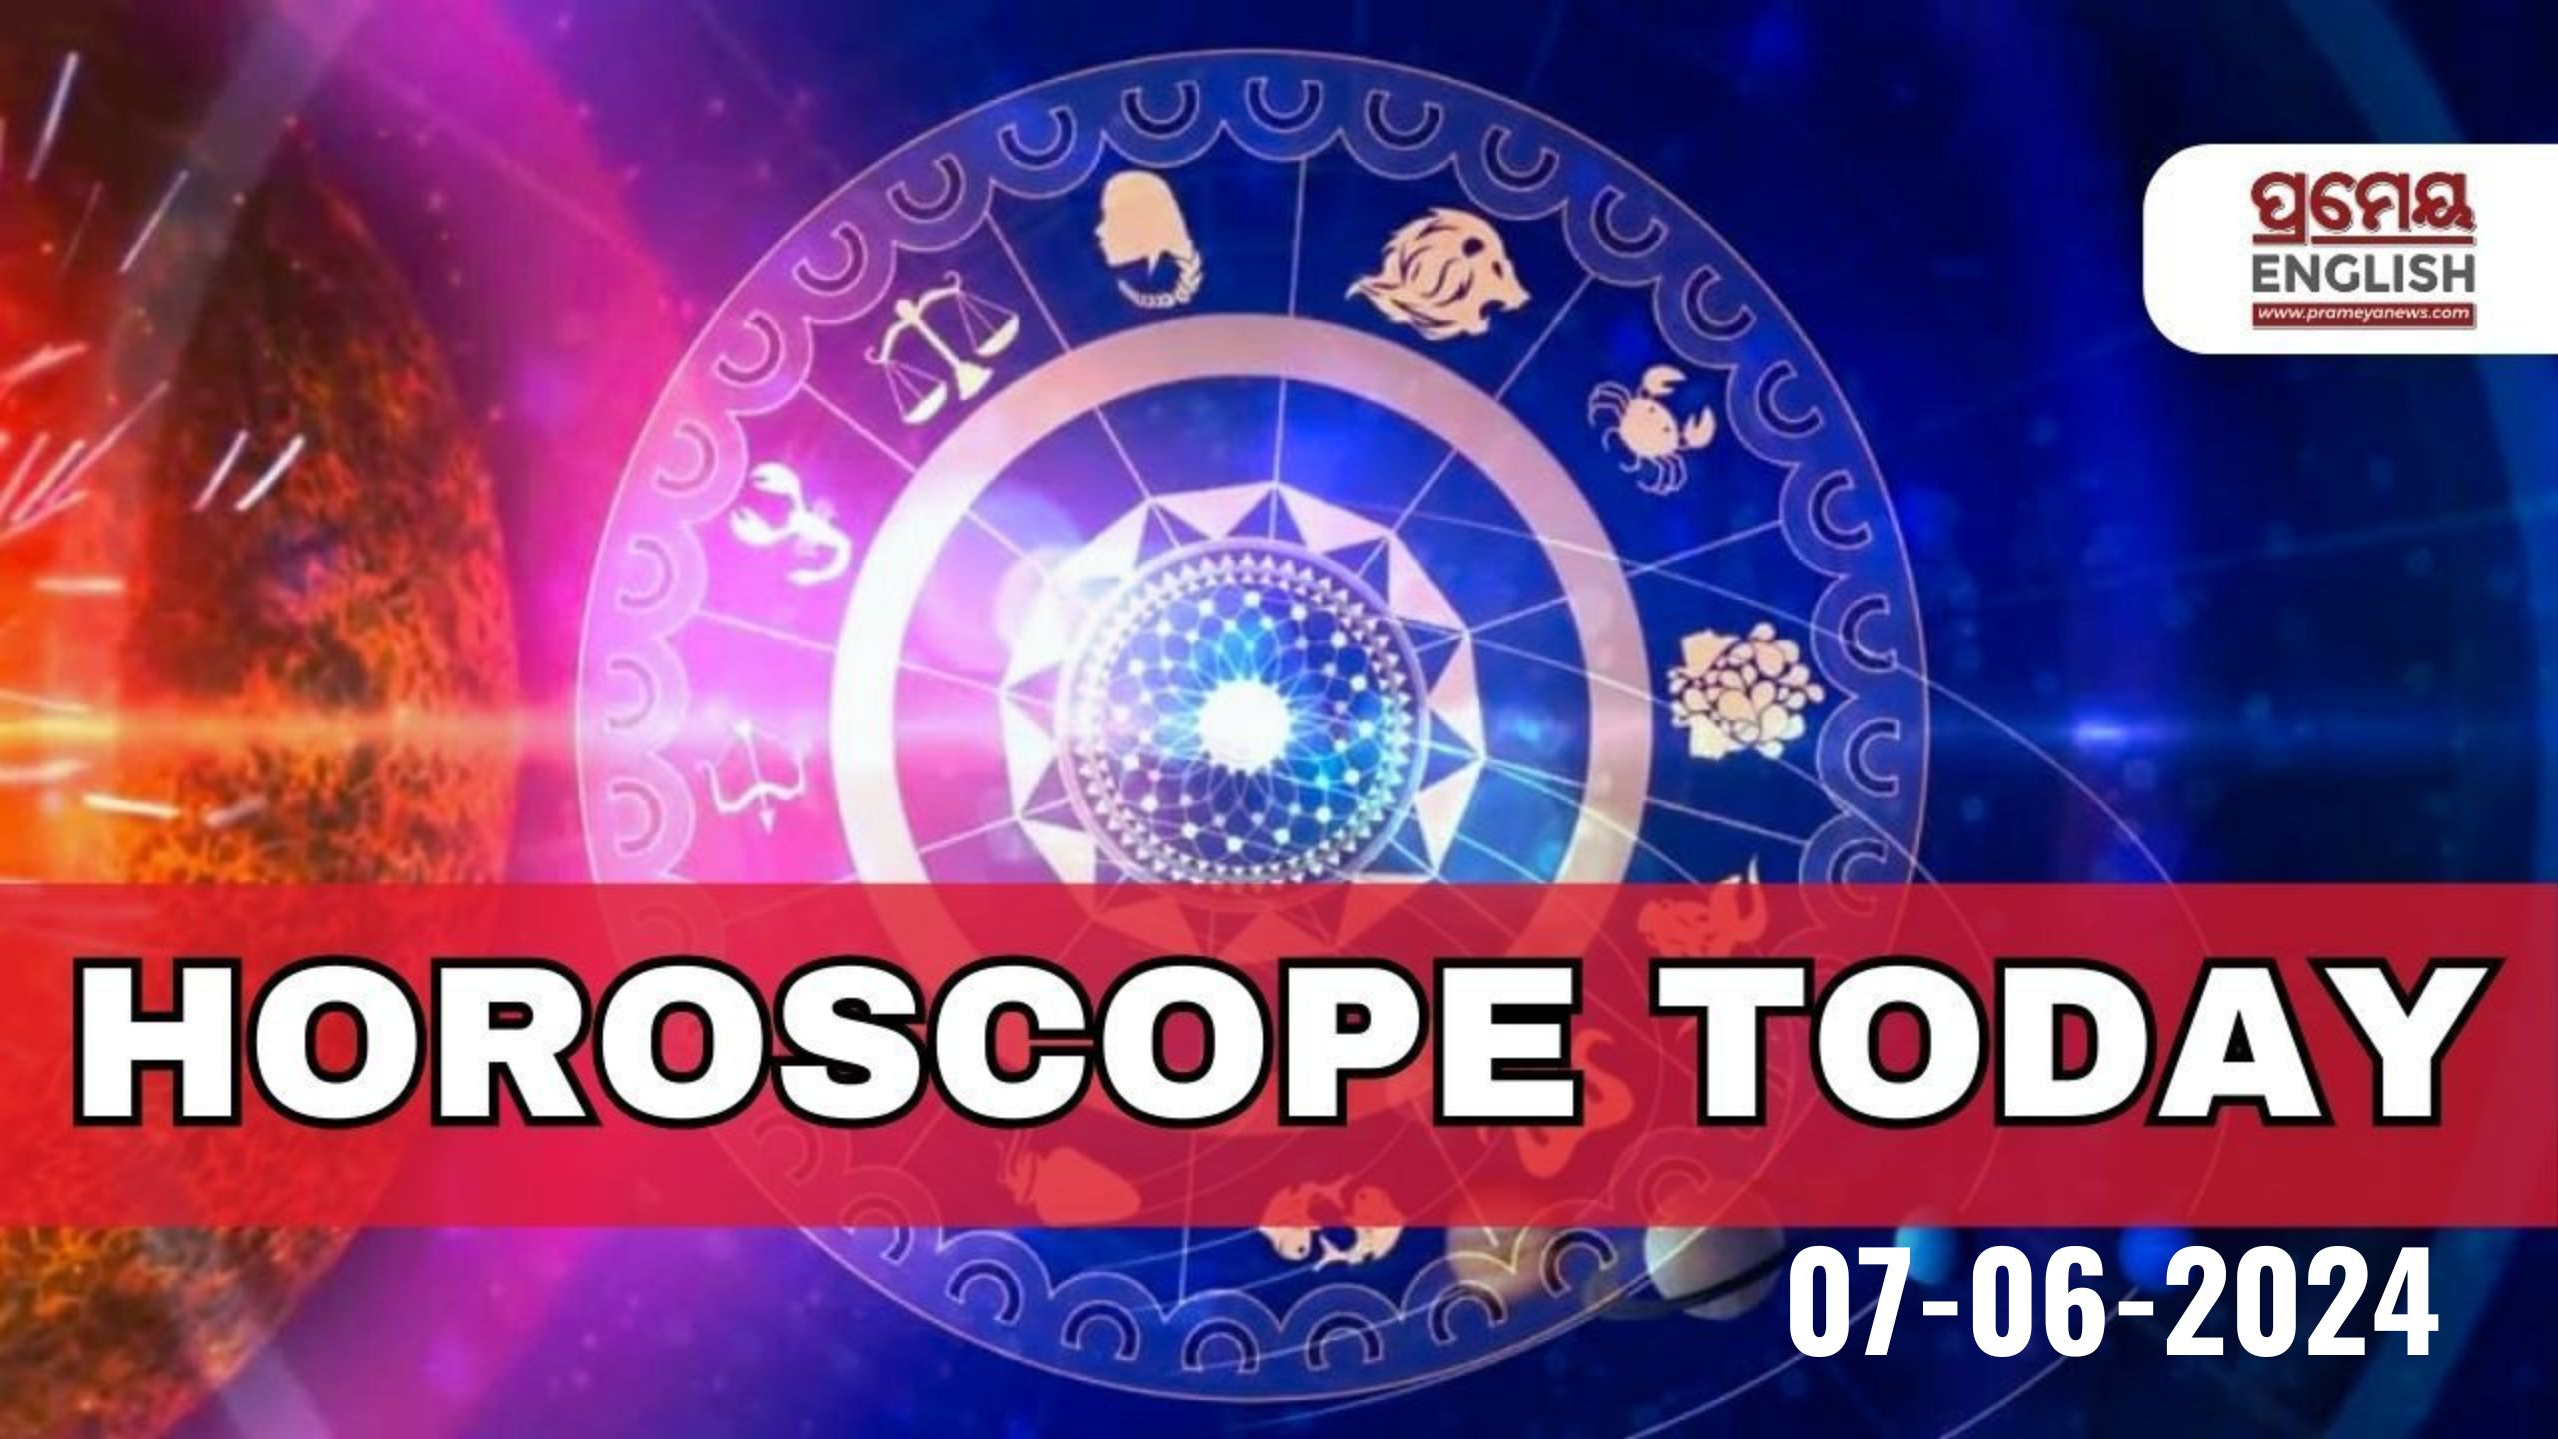 Horoscope Today: Astrological prediction for July 4, 2024